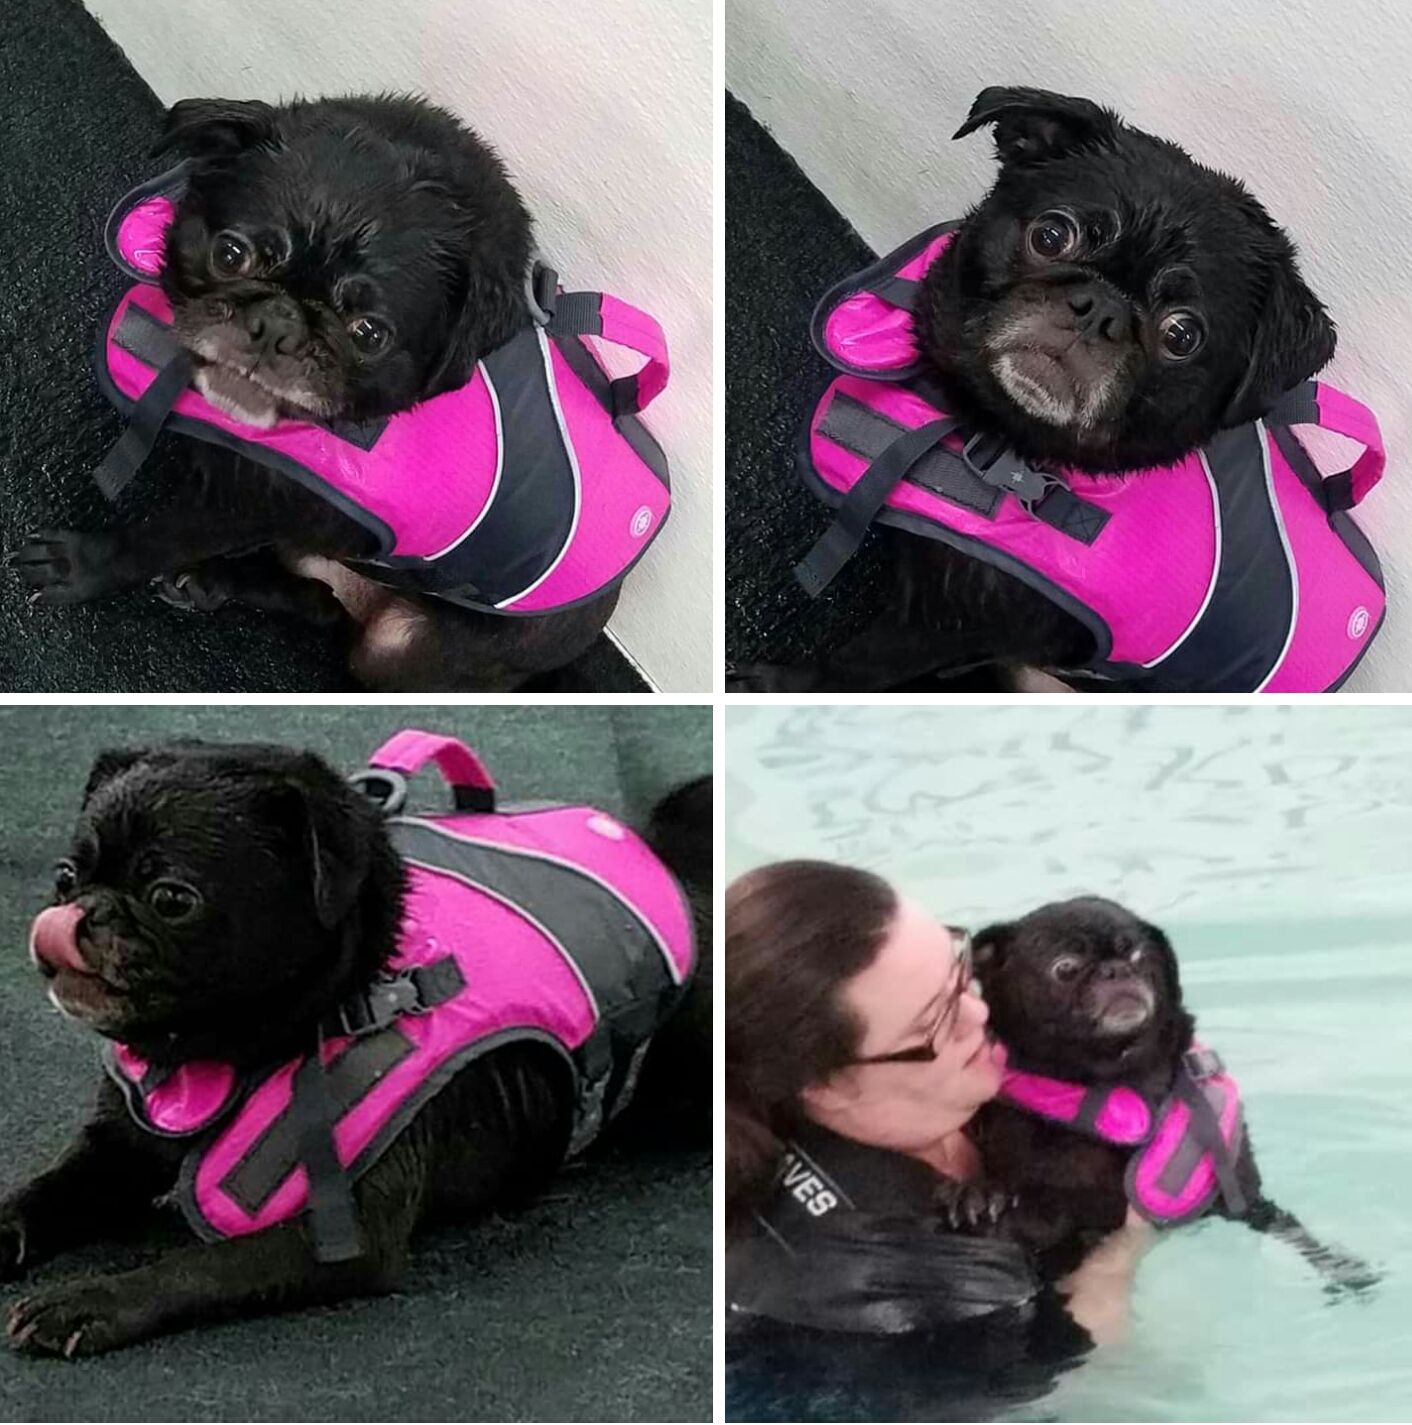 I work at a pool for dogs and this pug came in for a swim today